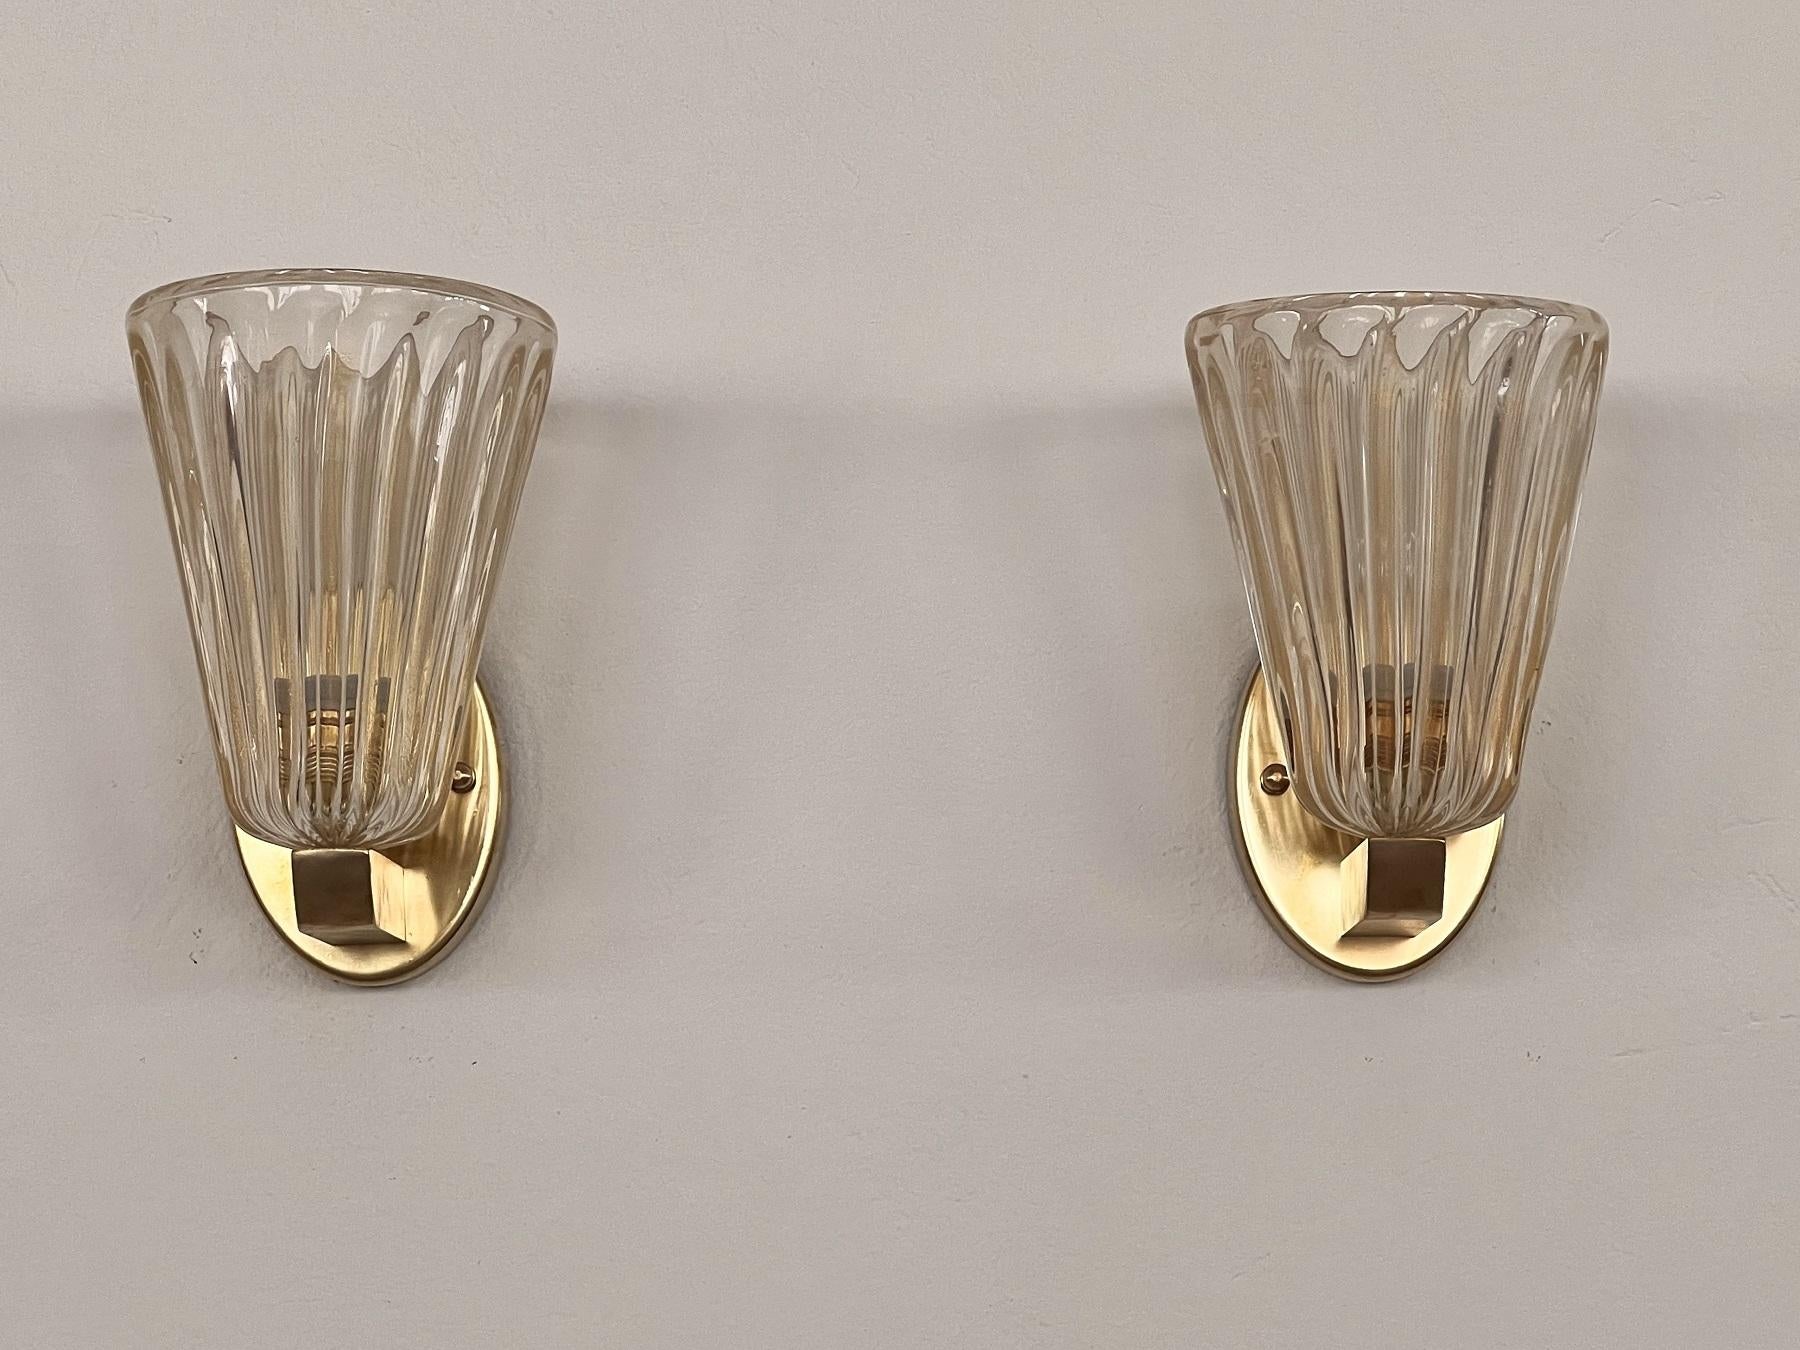 Italian Brass and Murano Glass Wall Lights or Sconces in Art Deco Style, 1990s For Sale 5